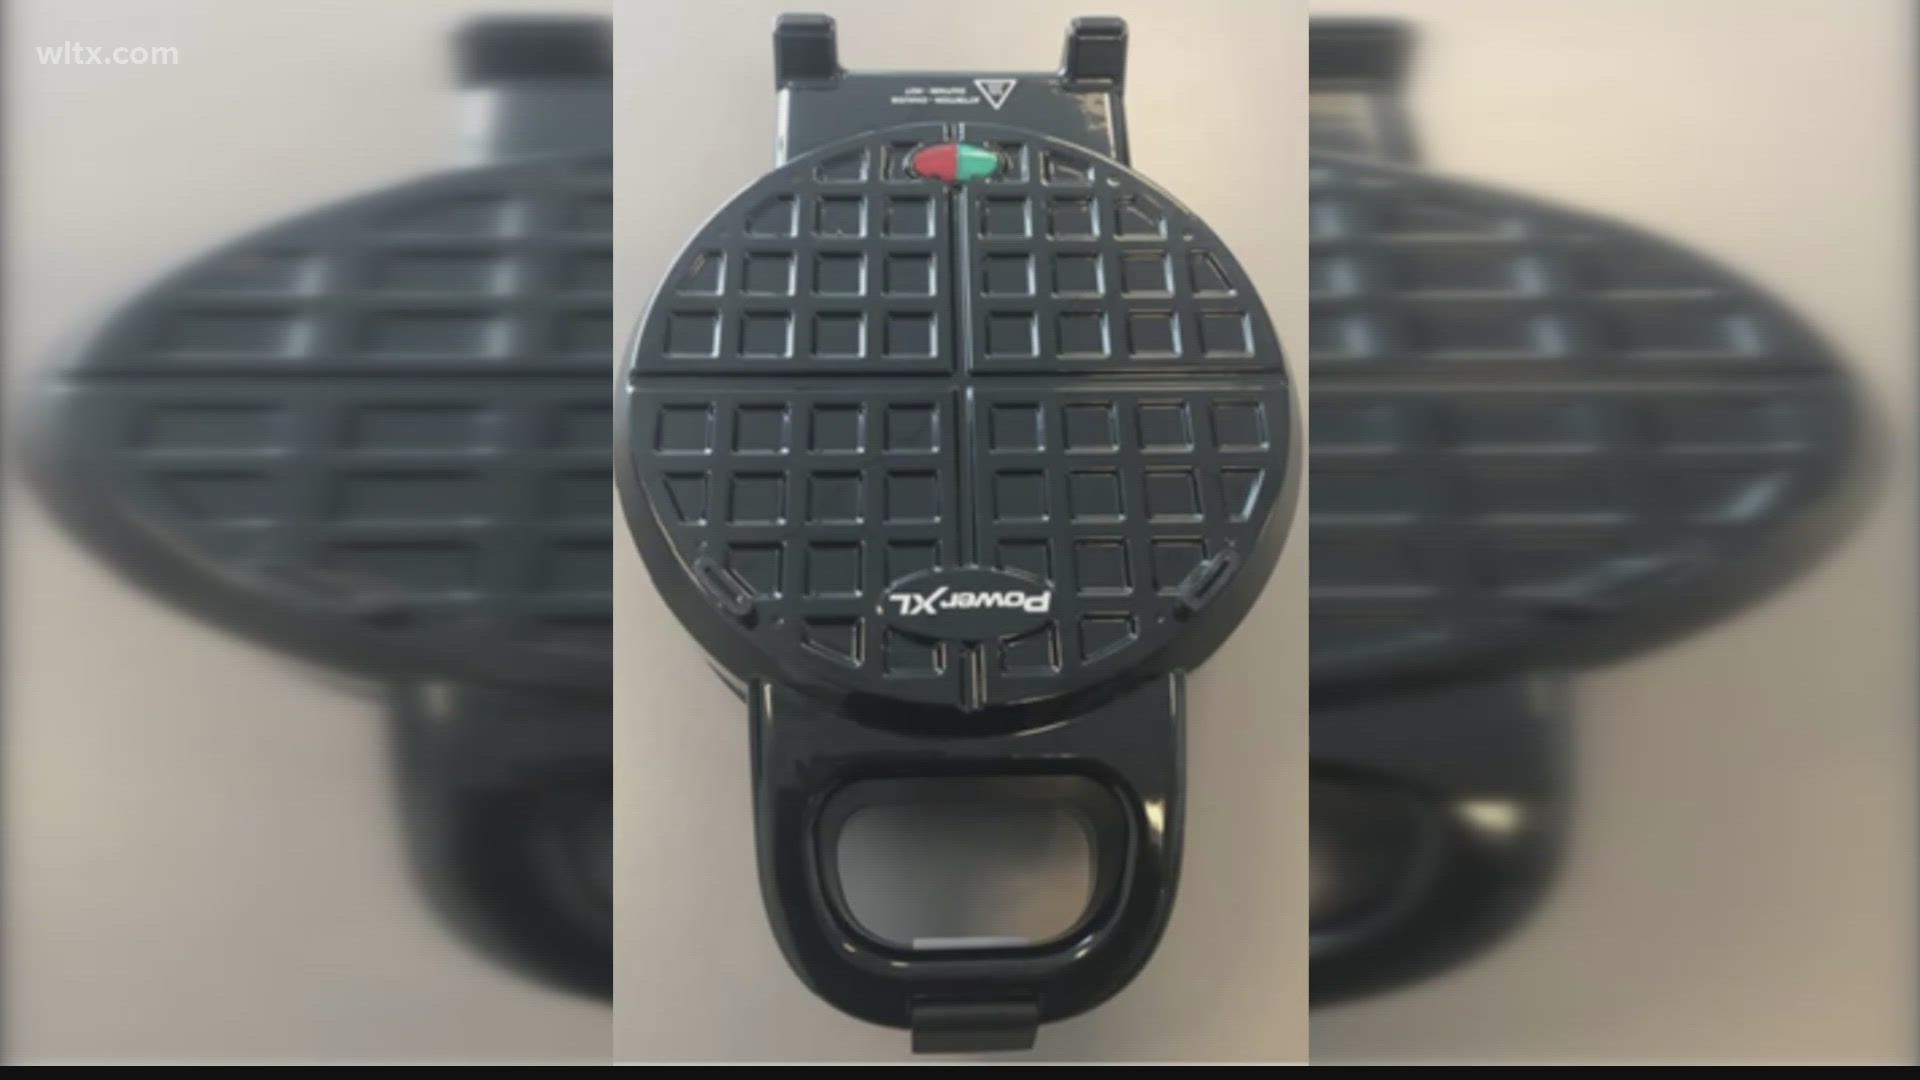 It comes in two sizes, five and seven inches with numerous colors.   You can find the Power XL logo on the top of the waffle maker.